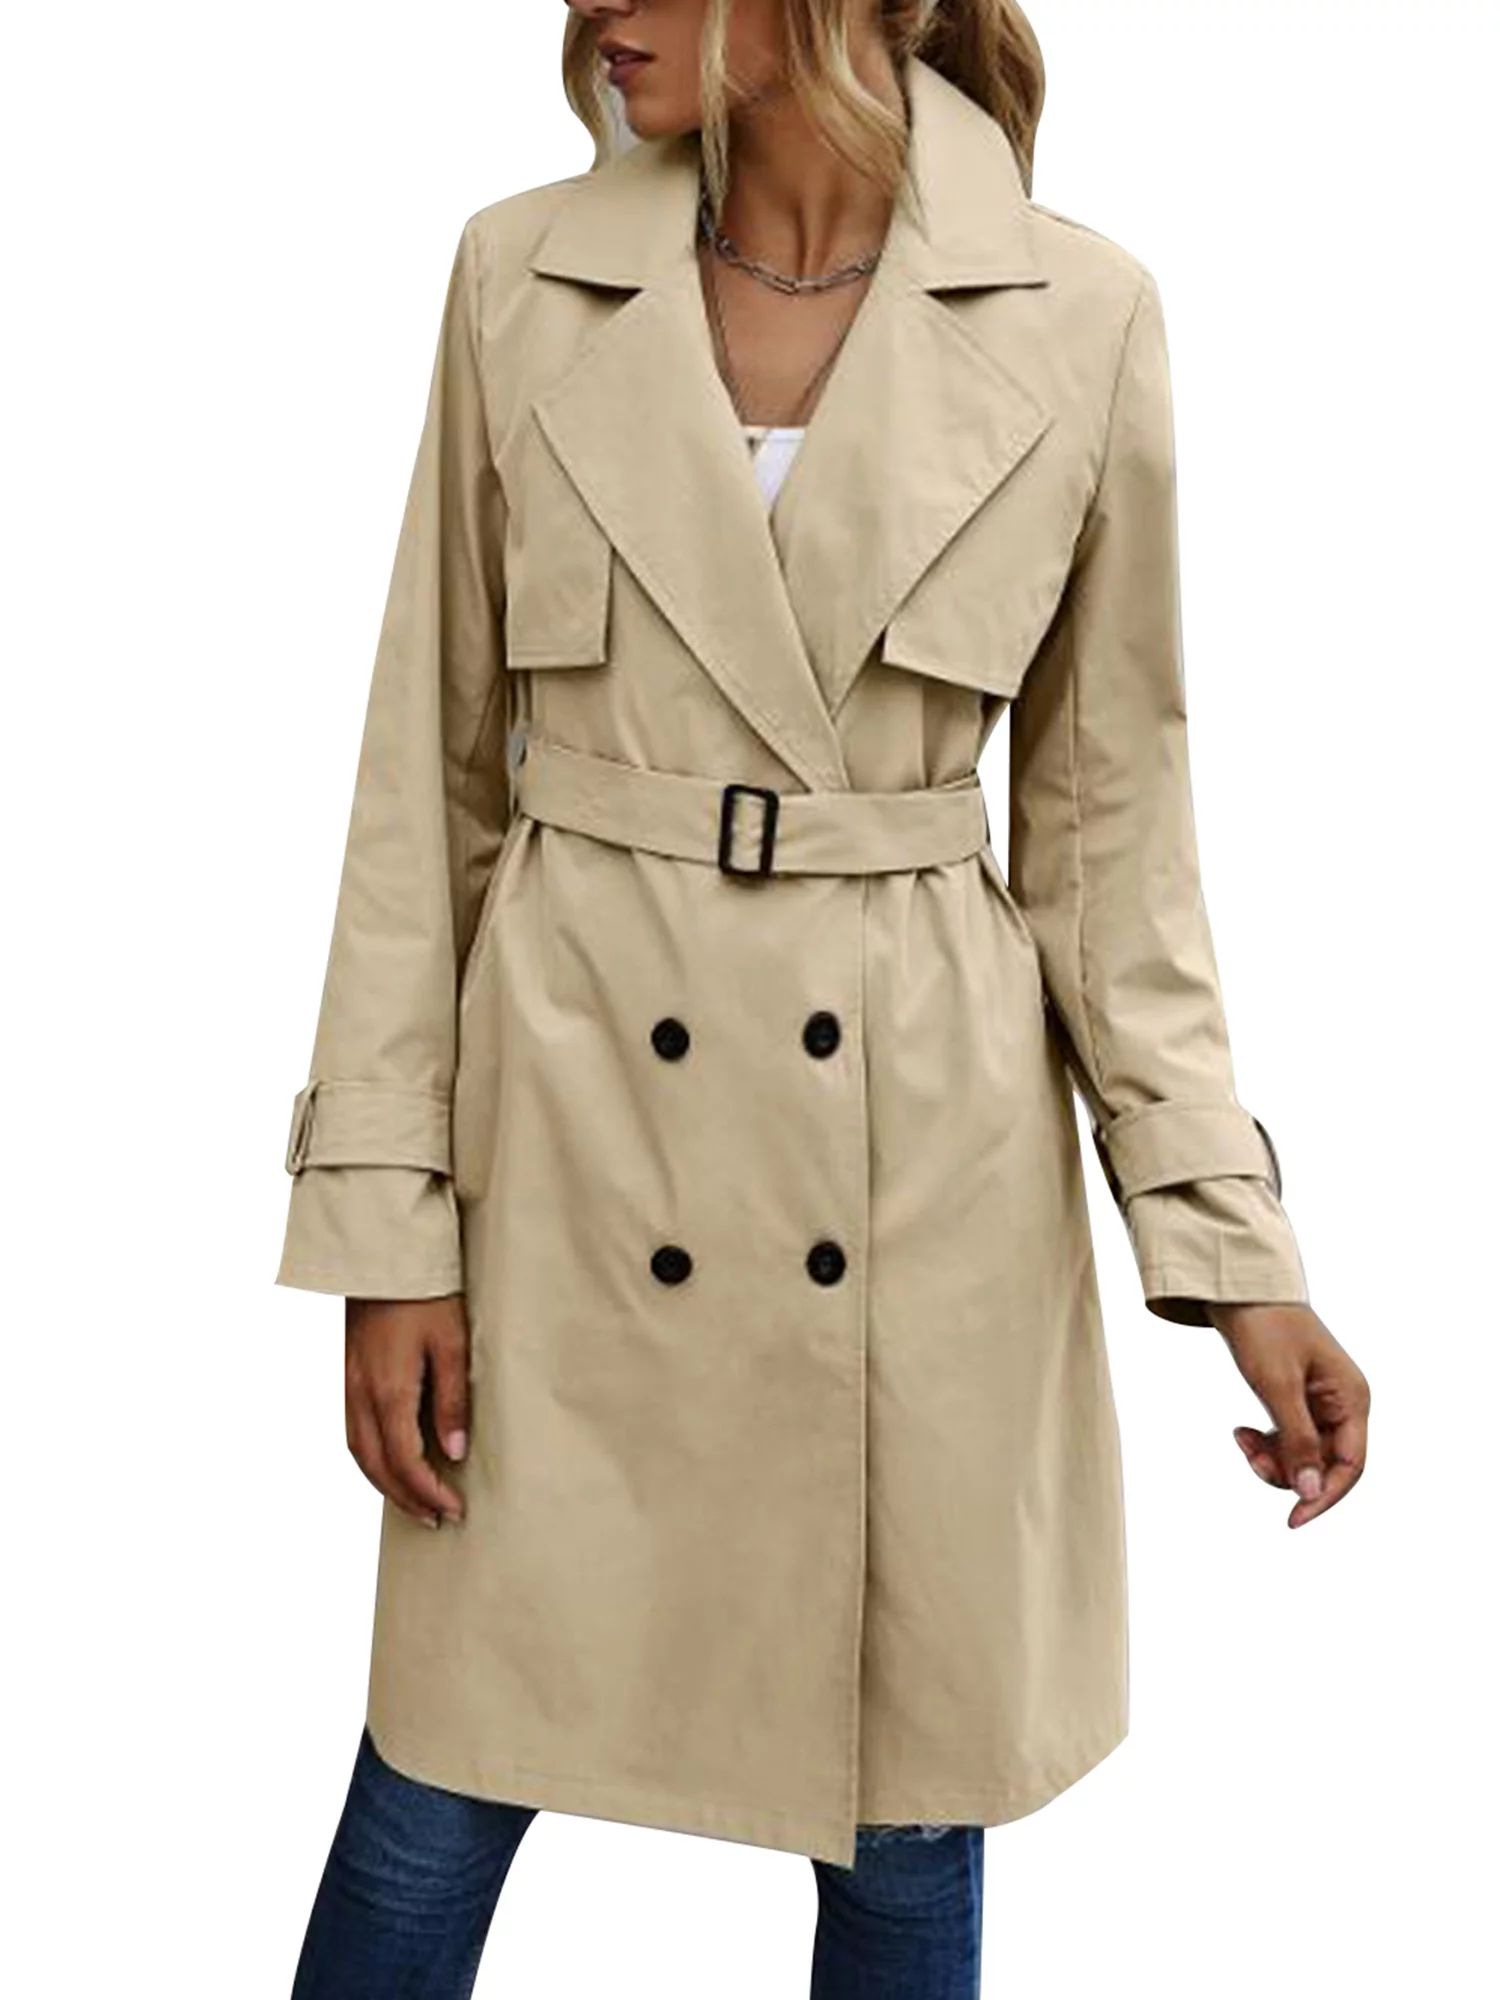 AvoDovA Women Jacket Solid Color Long Sleeve Lapel Double Breasted Belted Trench Coat Khaki L | Walmart (US)